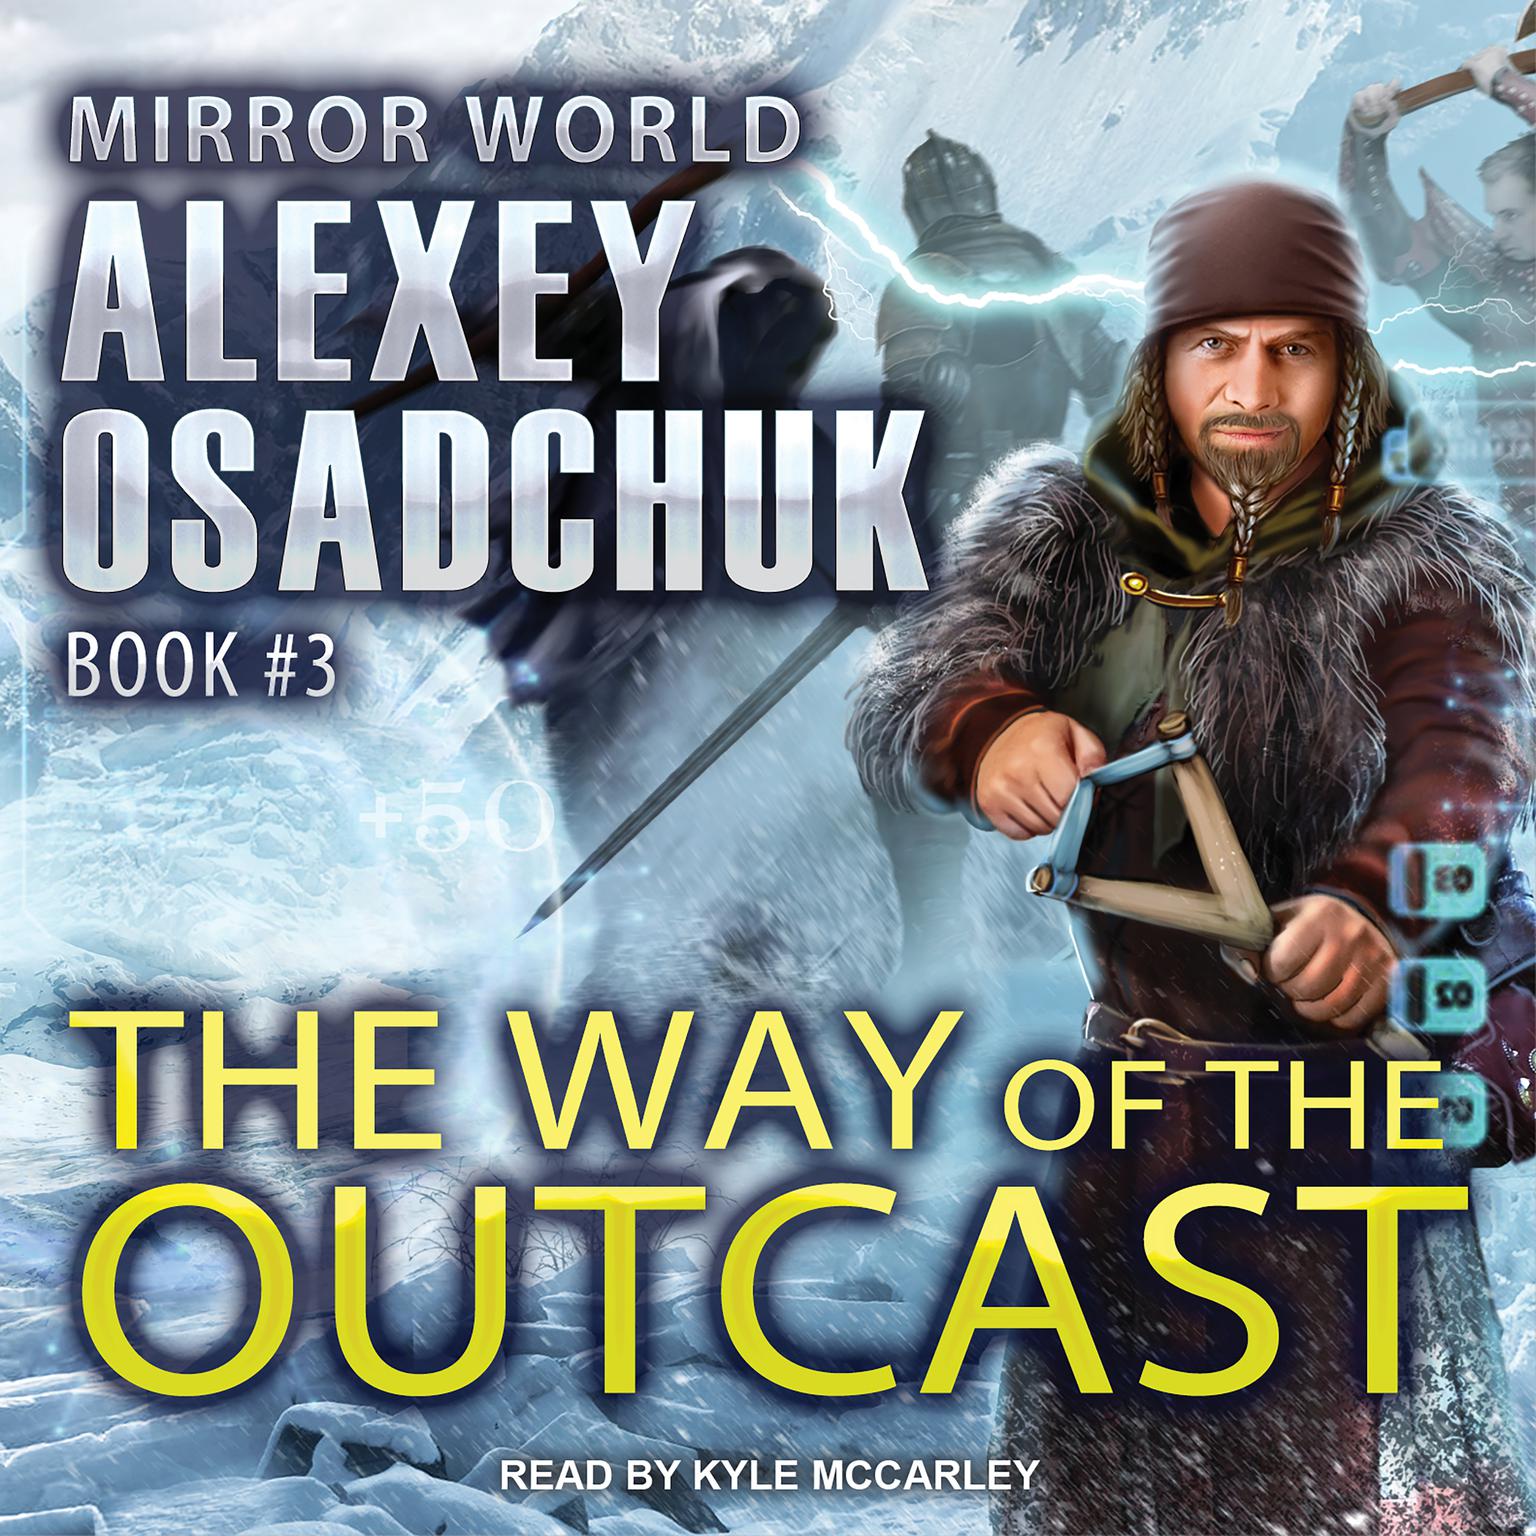 The Way of the Outcast Audiobook, by Alexey Osadchuk